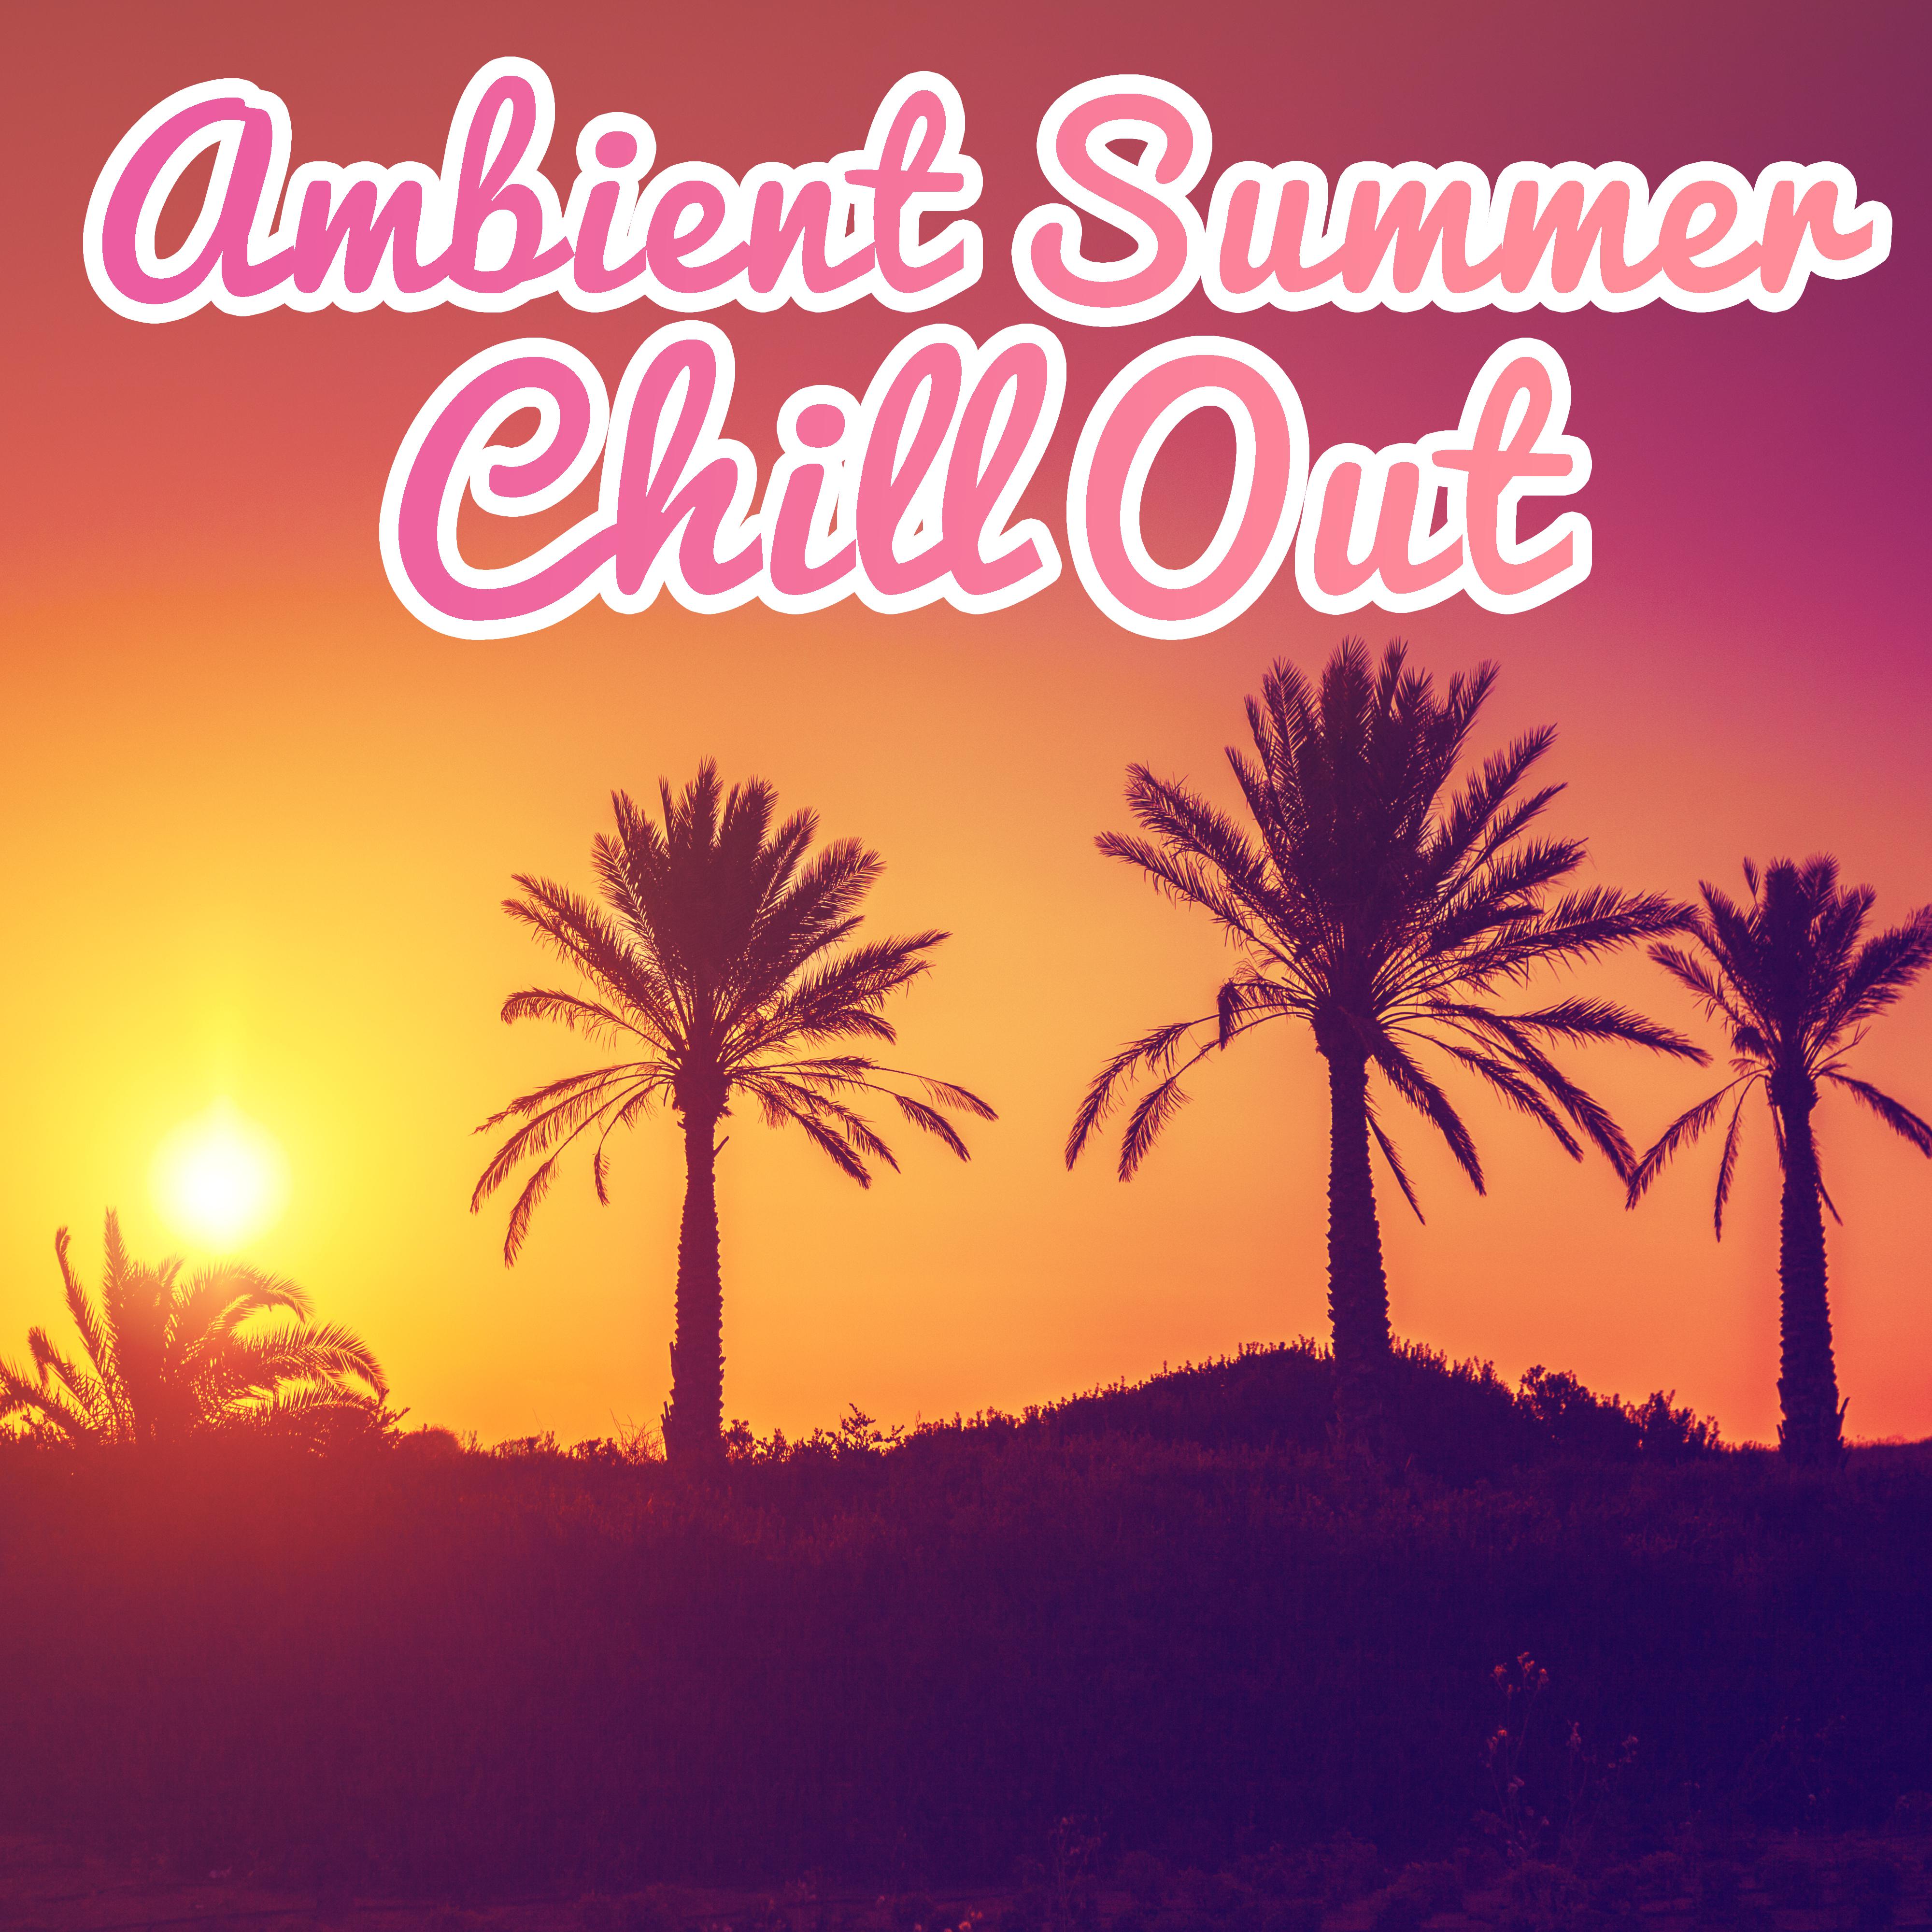 Ambient Summer Chill Out – Relax & Chill, Electronic Beats, Chill Out Vibes, Summer Music